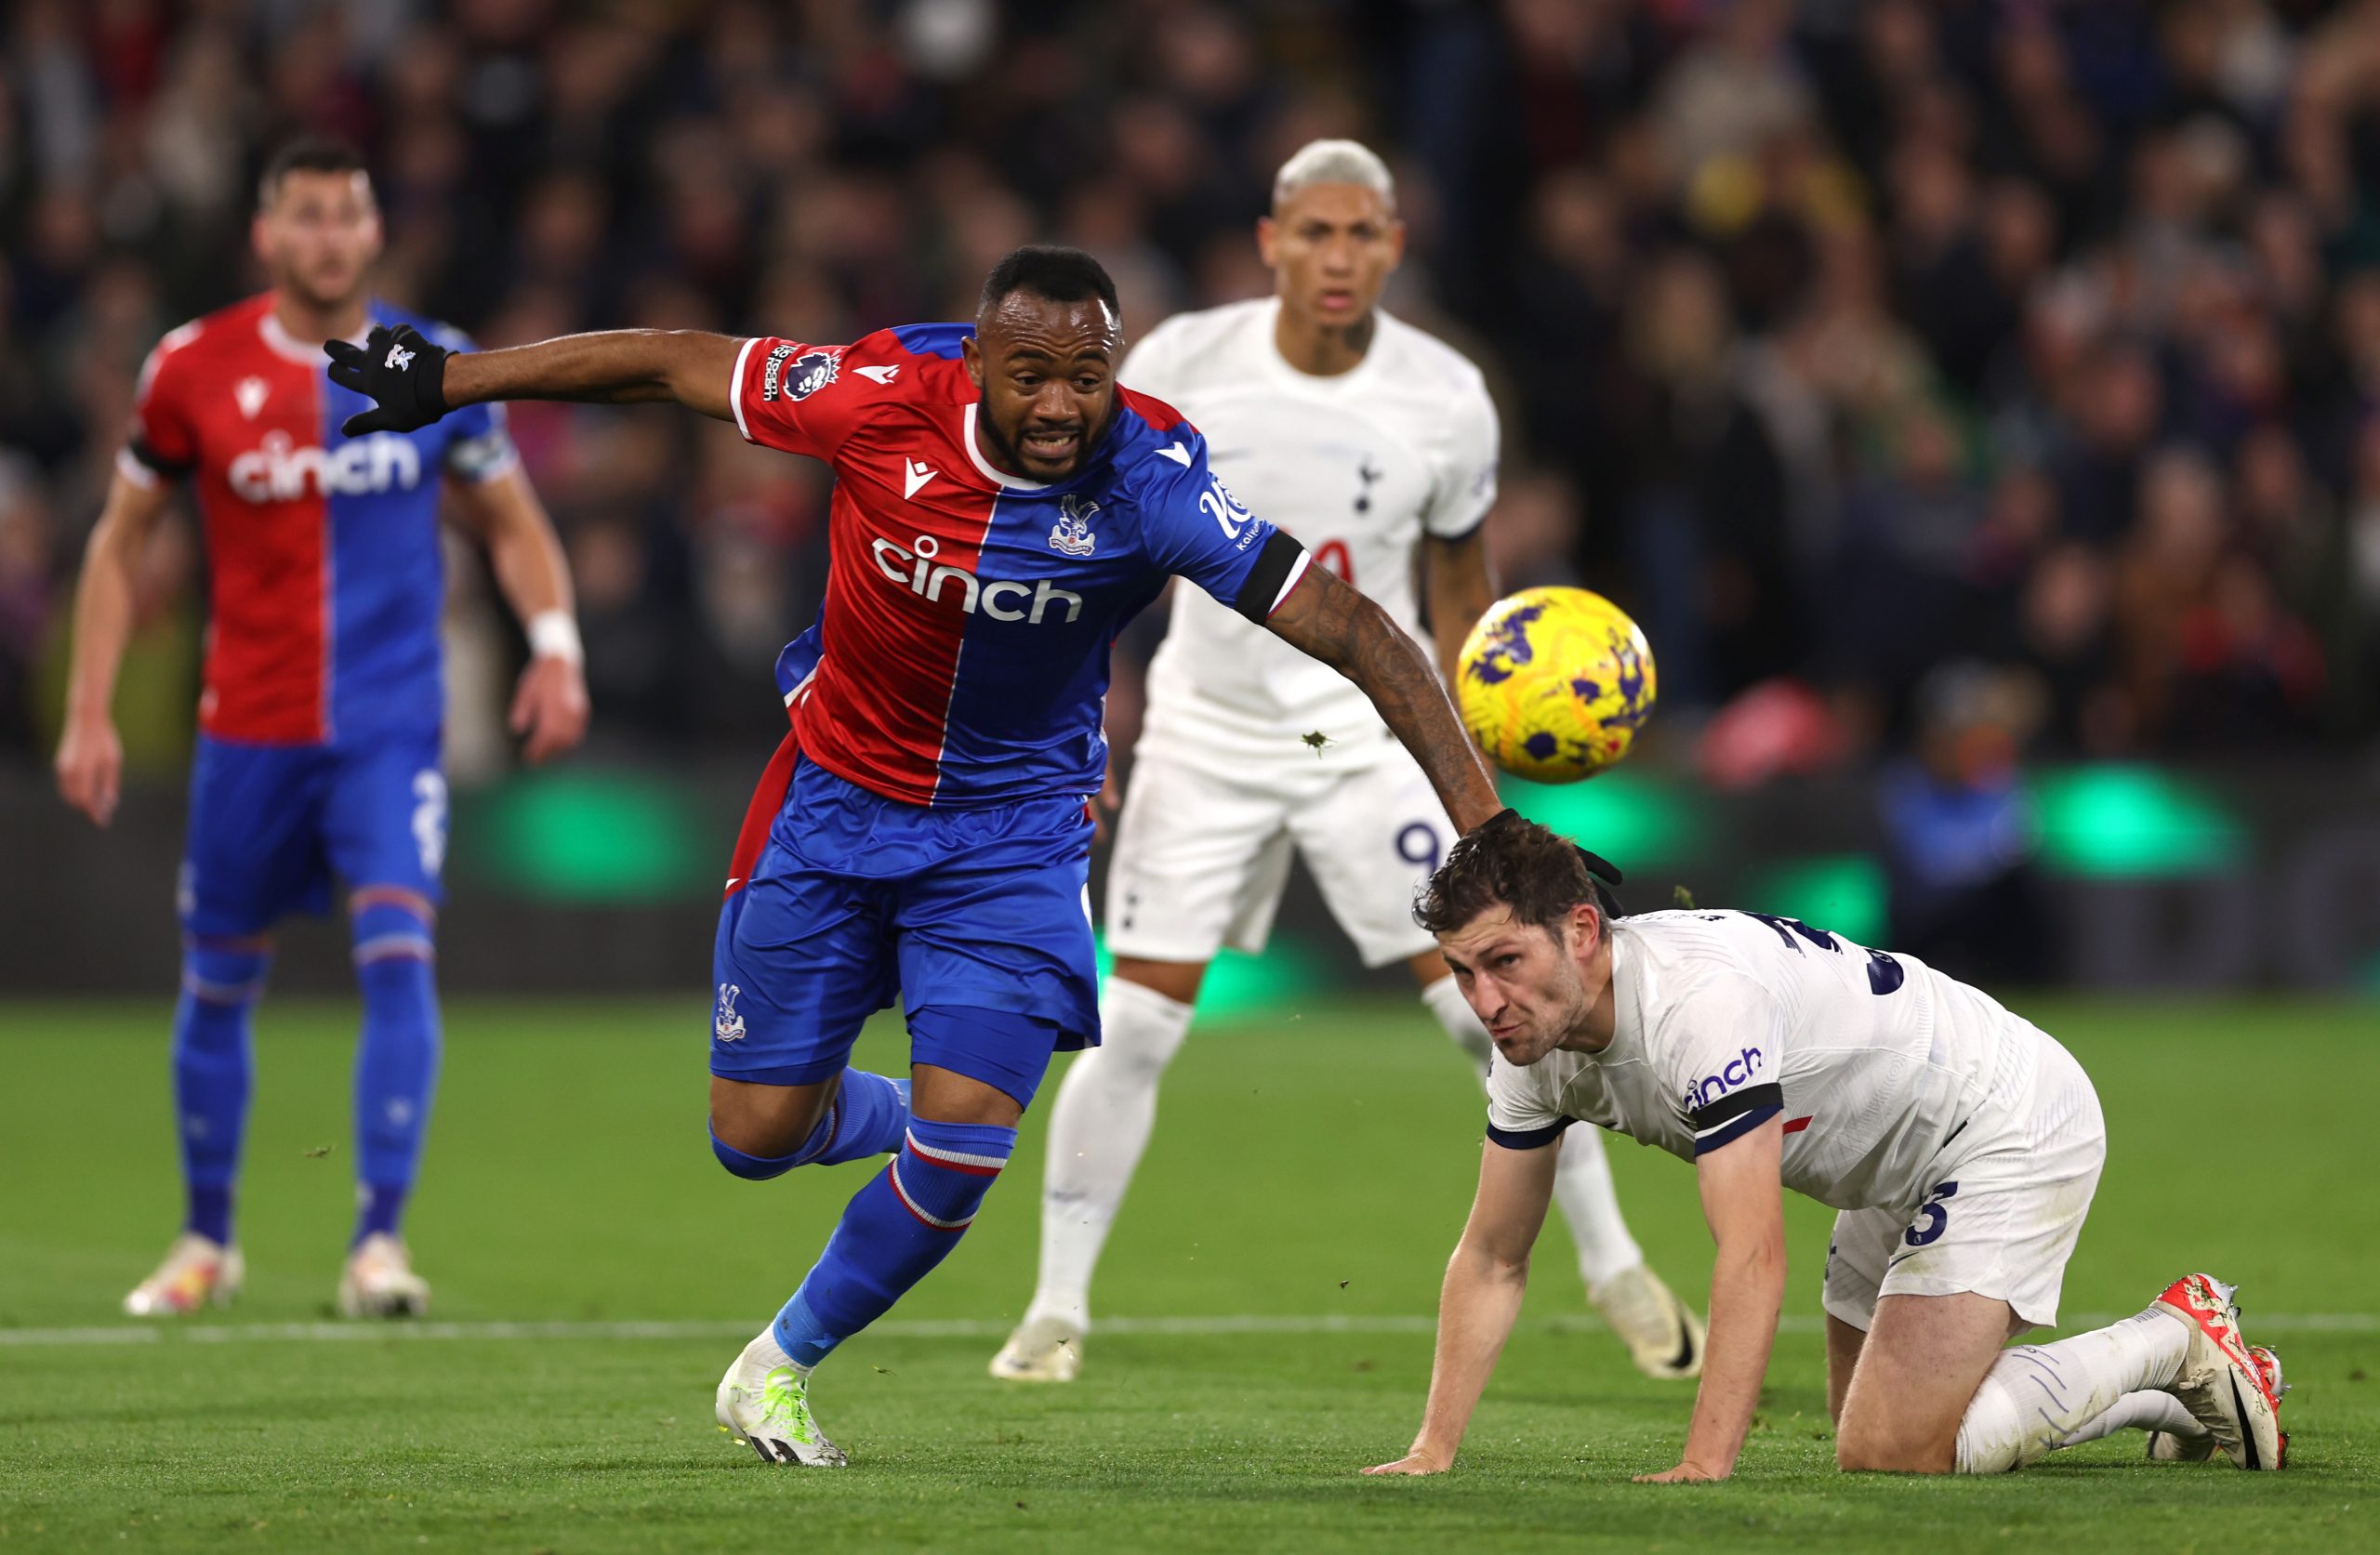 Jordan Ayew of Crystal Palace is tackled by Ben Davies of Tottenham Hotspur. (Photo by Alex Pantling/Getty Images)